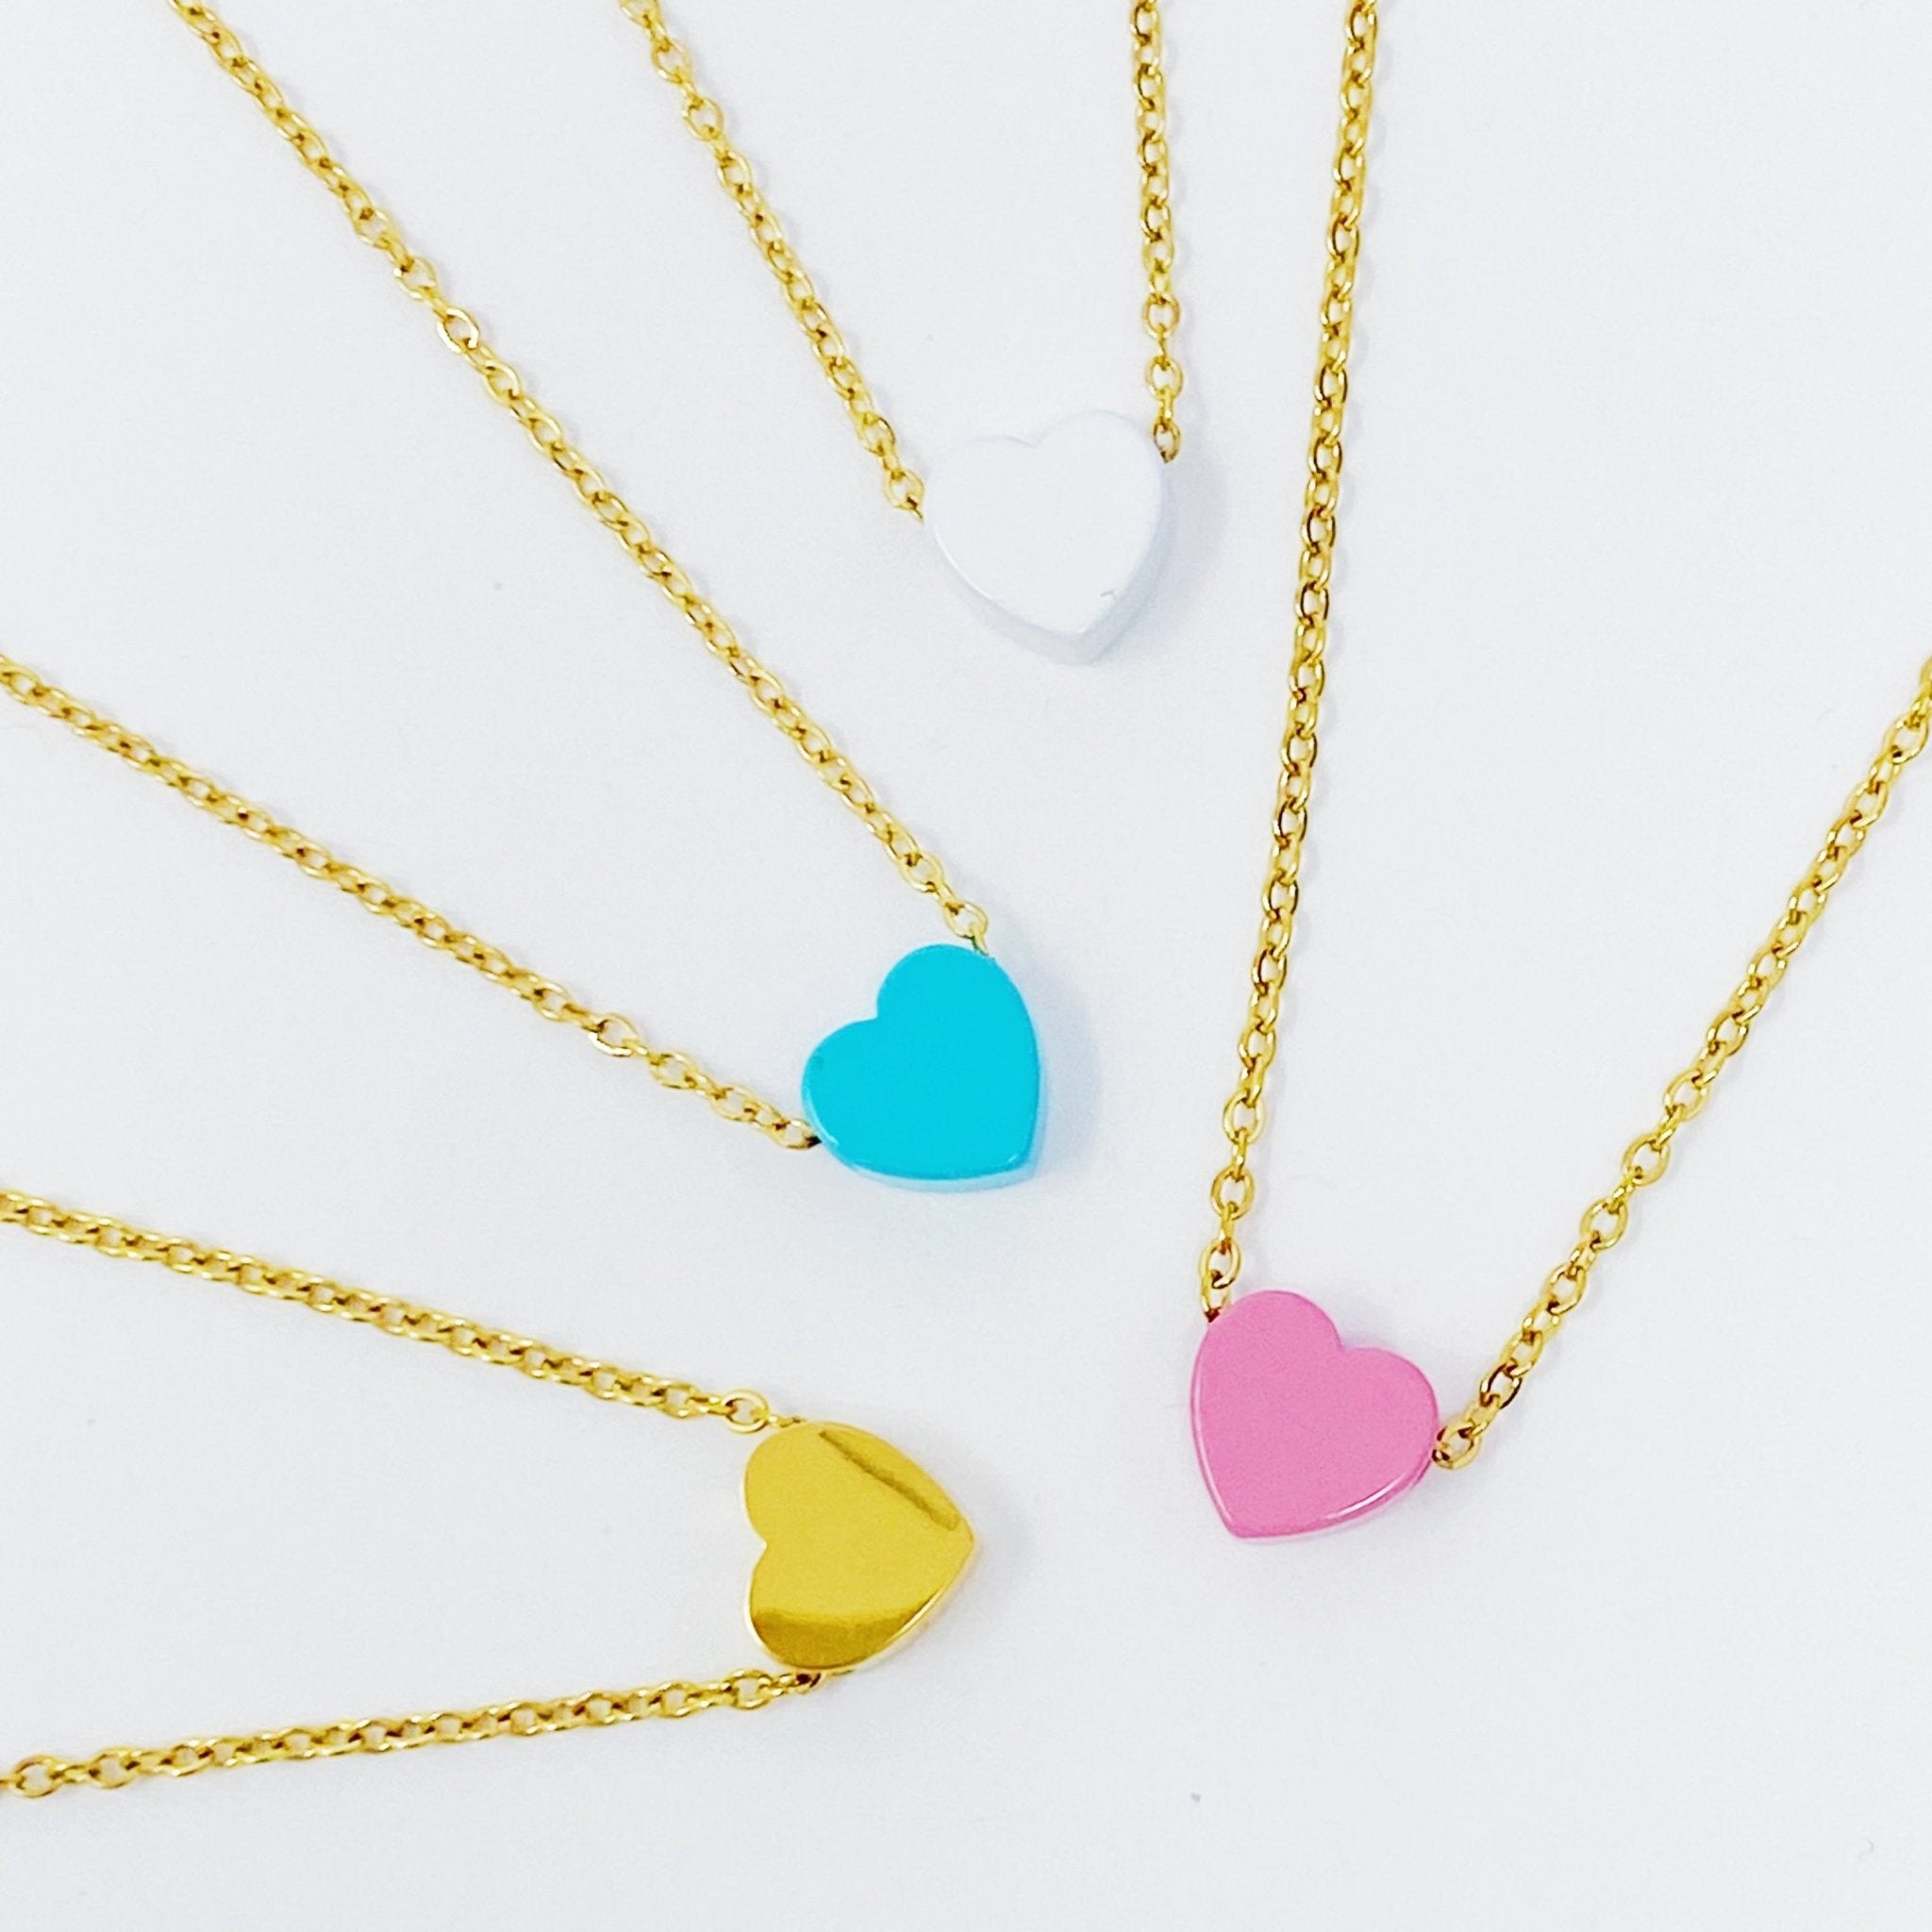 So Very Loved Heart Necklace - The Kindness Cause